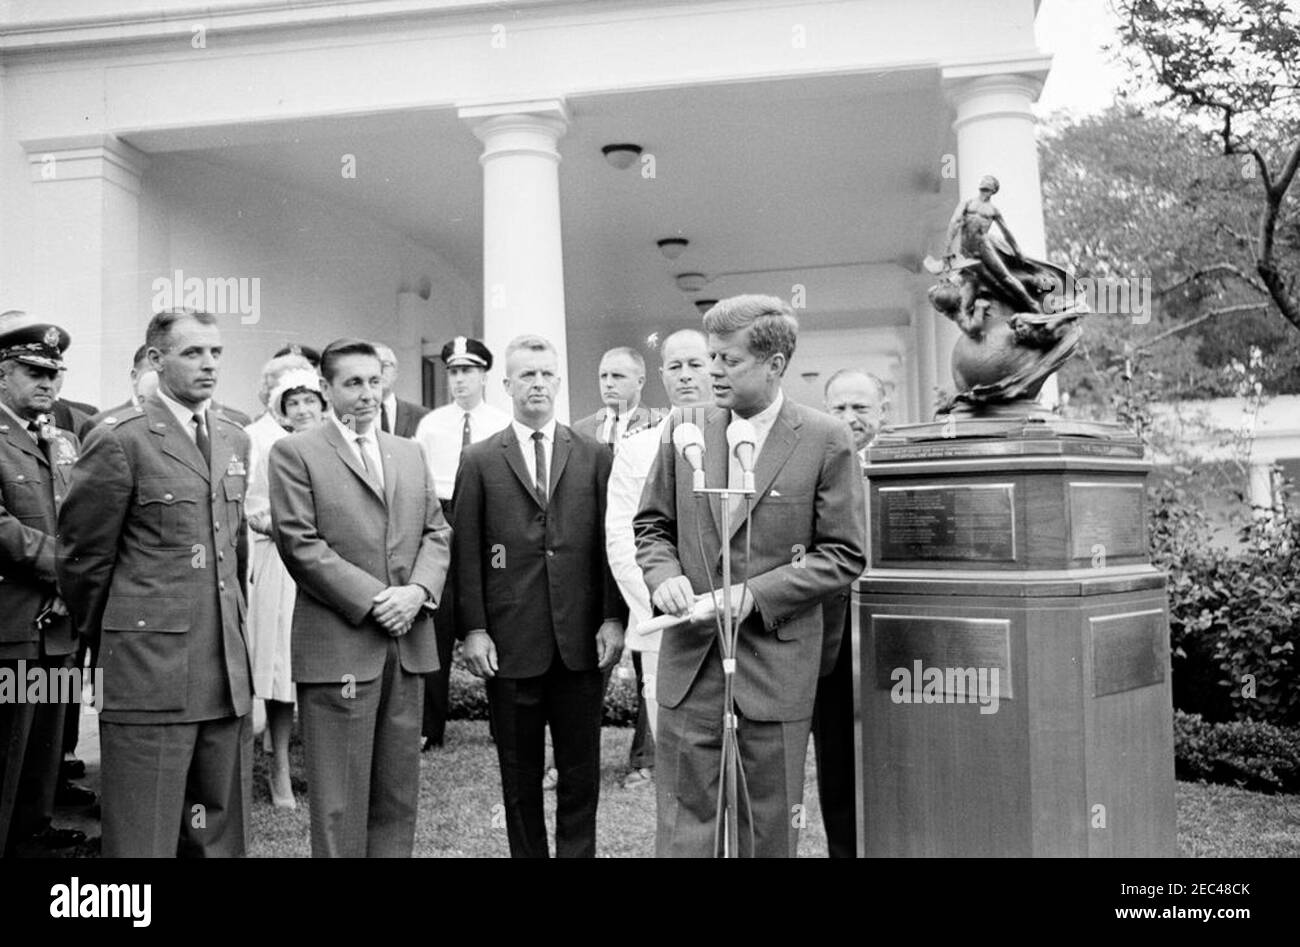 Presentation of the 1961 Collier Trophy, 11:30AM. President John F. Kennedy presents the 1961 Robert J. Collier Trophy to four X-15 pilots, on behalf of the National Aeronautic Association (NAA). Standing behind President Kennedy are the recipients (L-R): Major Robert M. White (U.S. Air Force), A. Scott Crossfield (North American Aviation), Joseph A. Walker (National Aeronautics and Space Administration), and Commander Forrest S. Petersen (U.S. Navy). Also pictured: Chief of Staff of the United States Air Force, General Curtis E. LeMay; White House Secret Service agent, Frank Yeager. West Wing Stock Photo